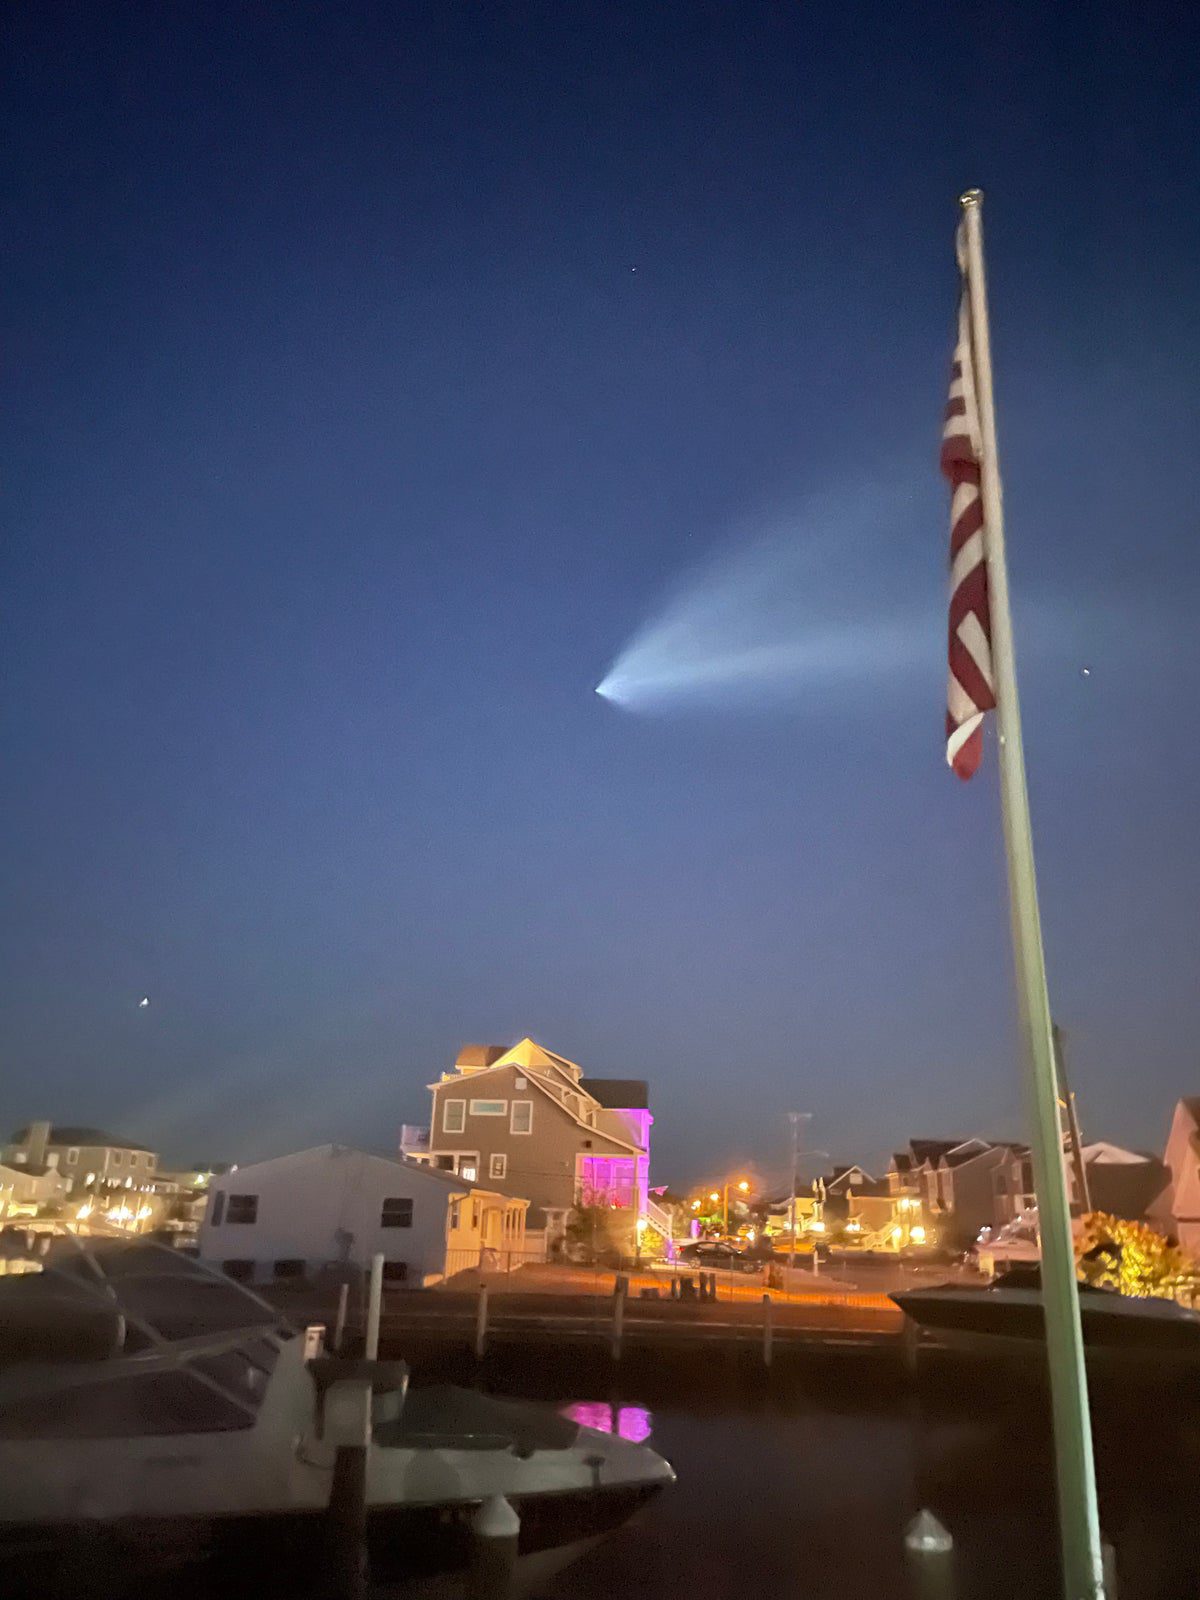 A SpaceX Falcon 9 rocket's vapor trail over the Toms River.  Image courtesy of News 12 viewer pair New Jersey viewer Michelle Arusha.